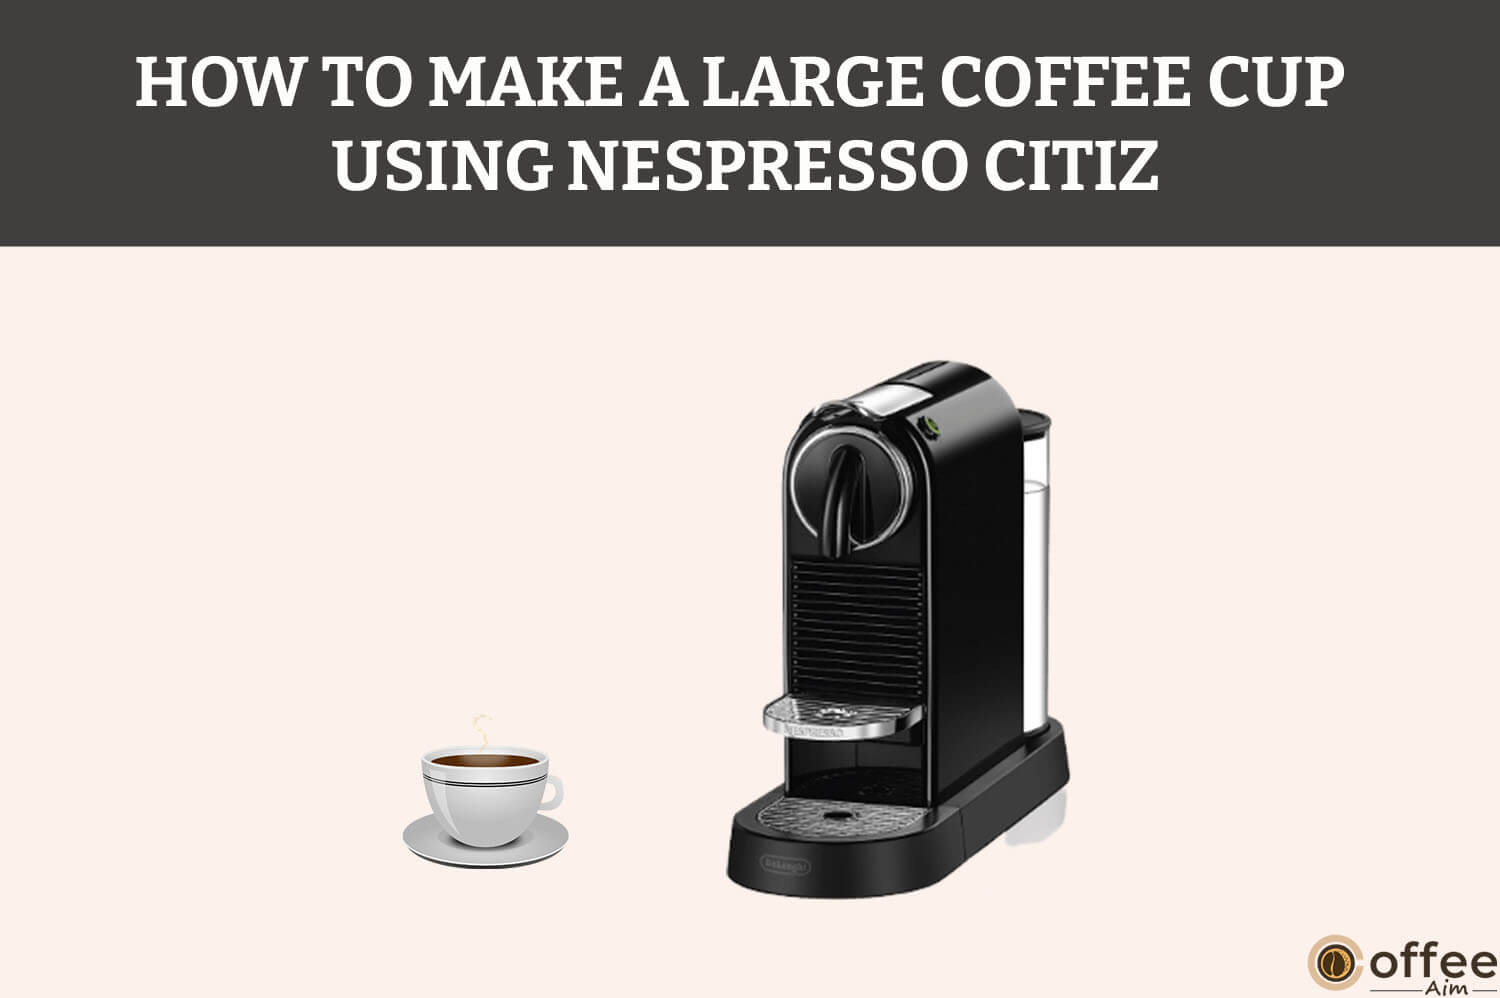 Featured image for the article "How To Make A Large Coffee Cup Using Nespresso Citiz"